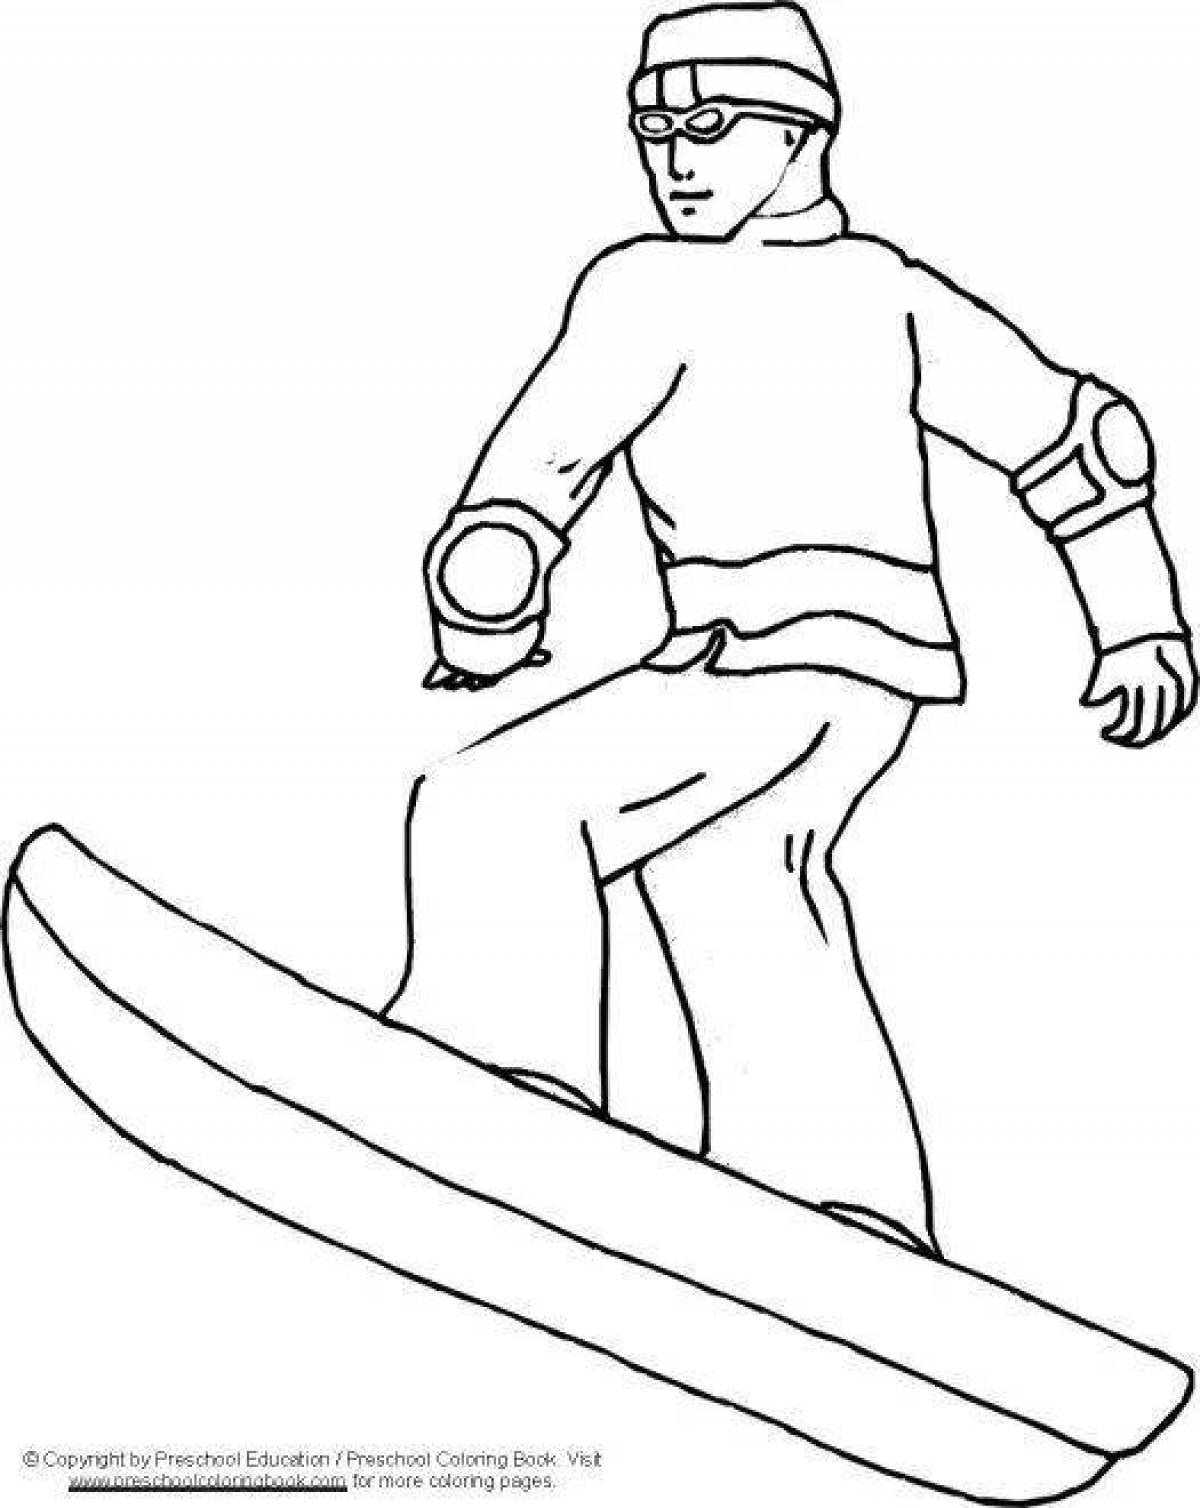 Fabulous snowboard coloring page